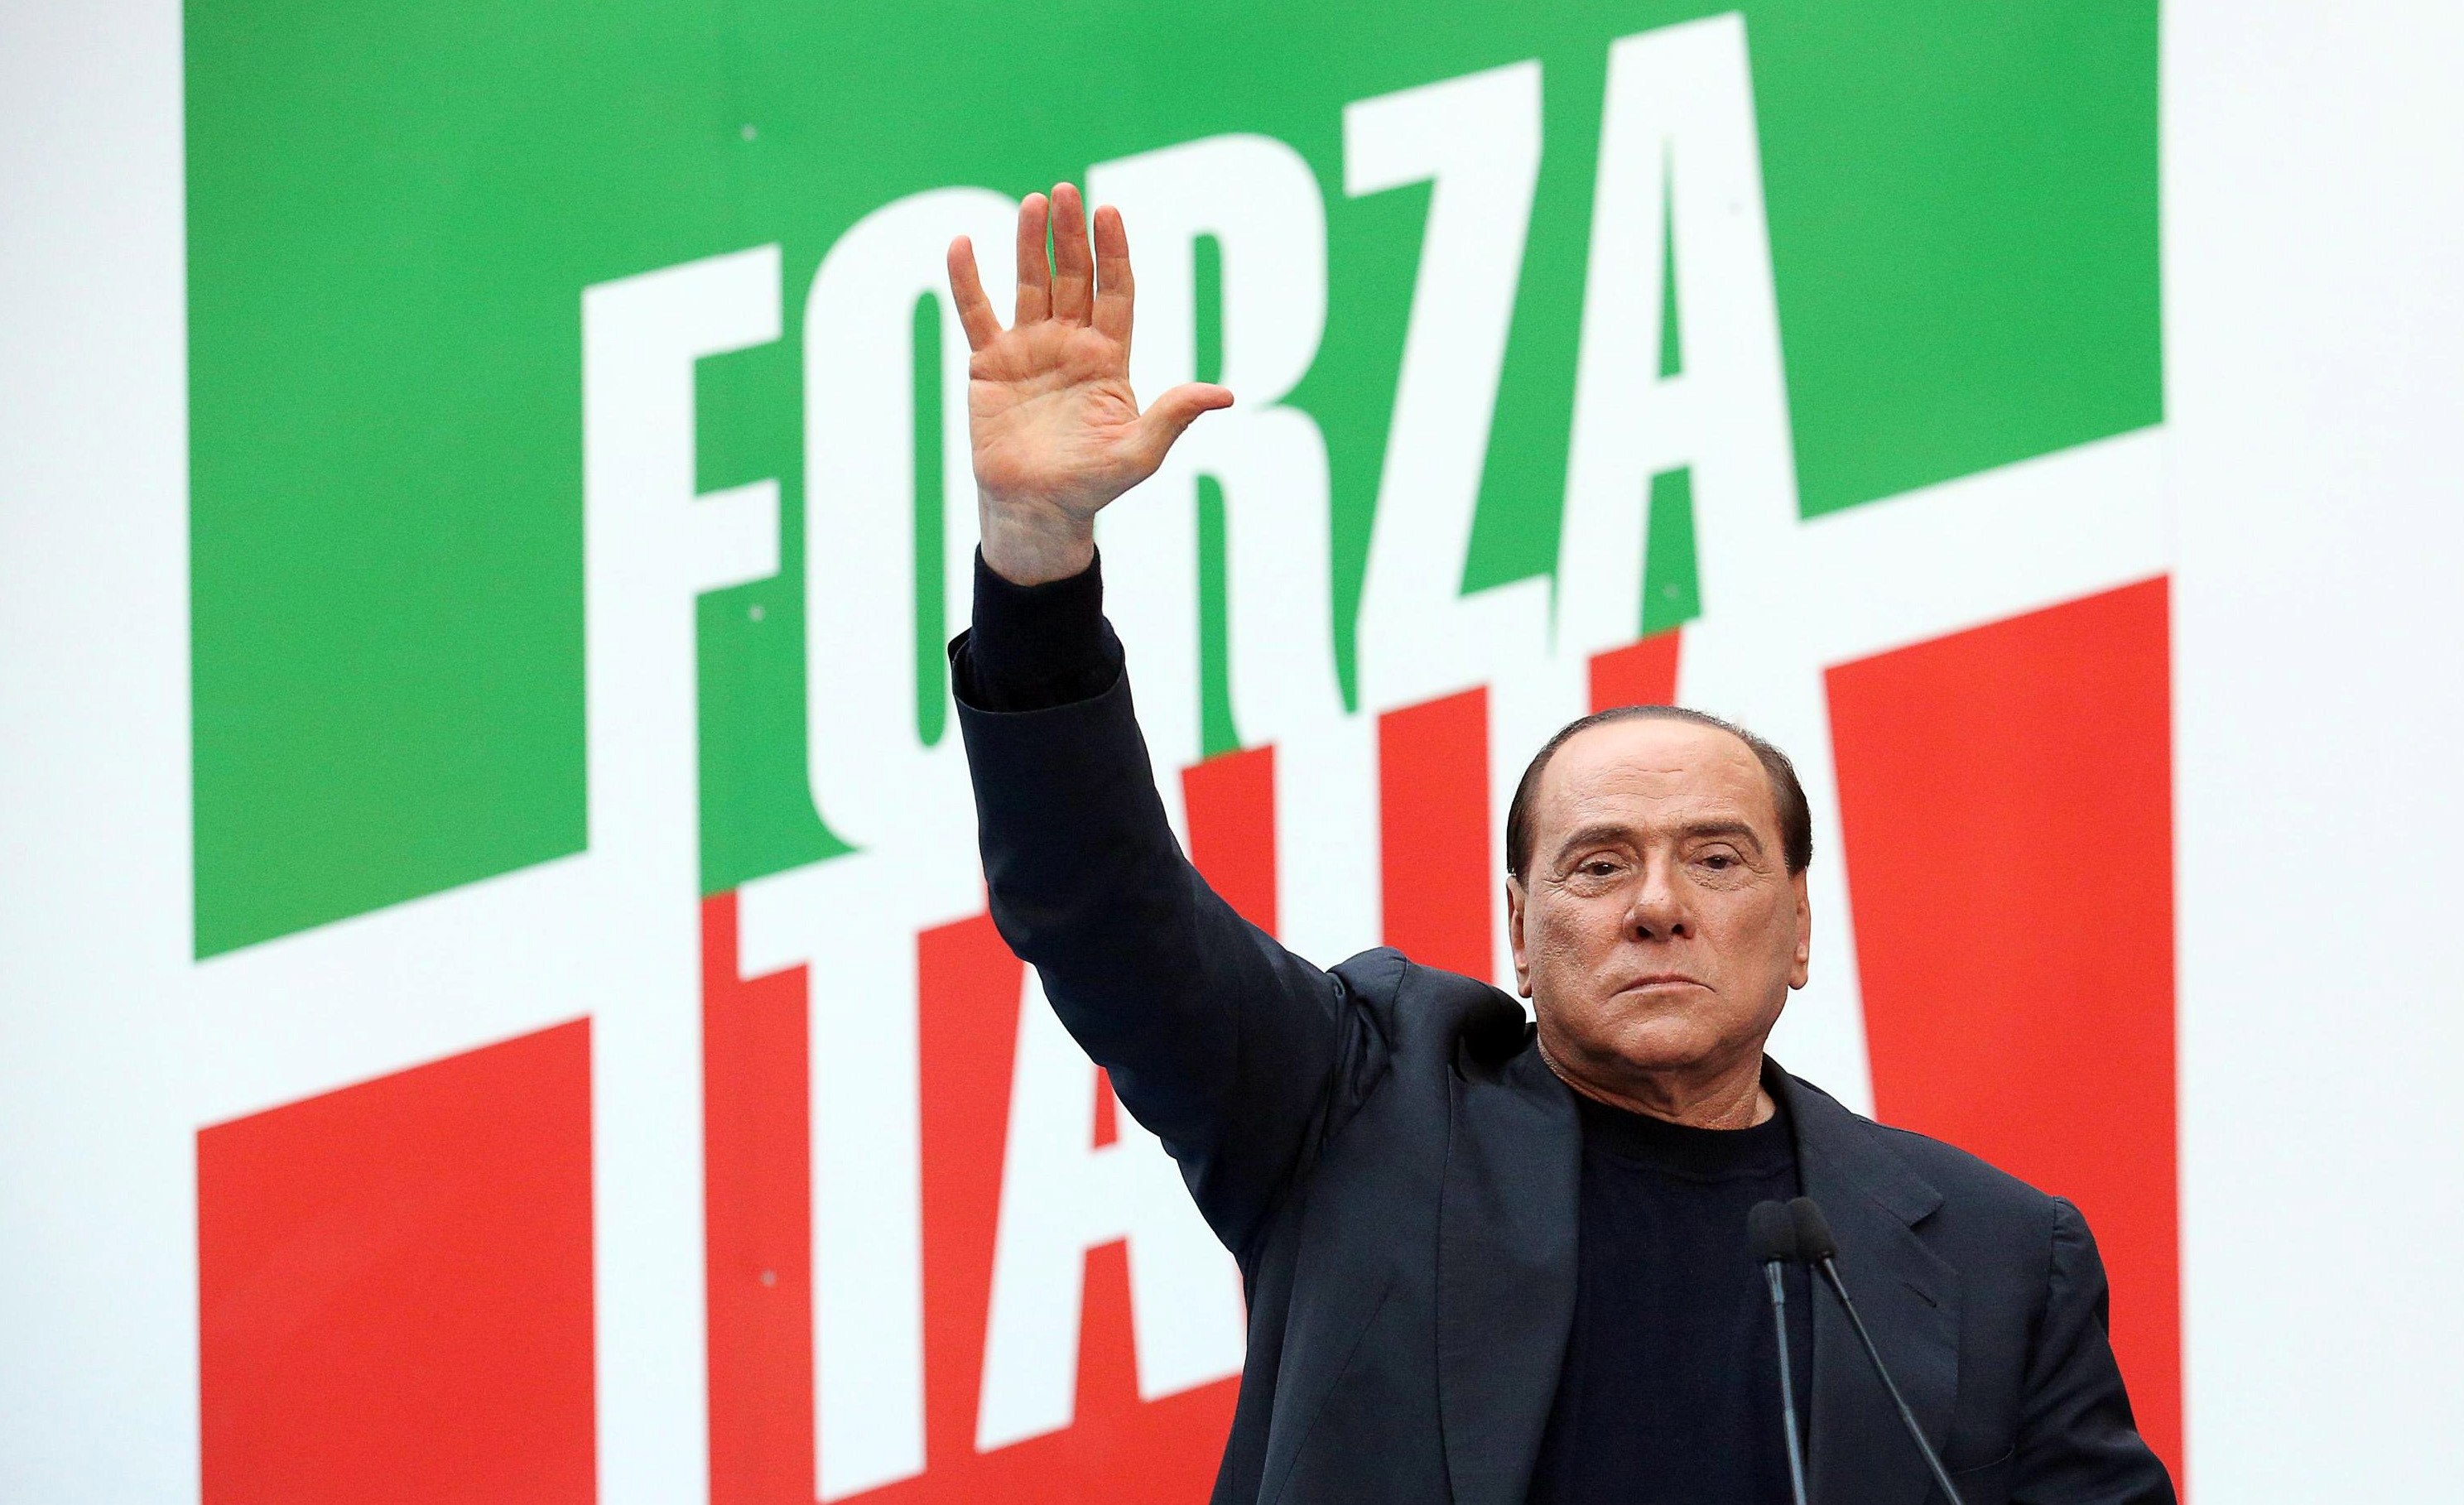 Silvio Berlusconi had suffered ill health for years, from heart surgery in 2016 to a 2020 hospitalisation for coronavirus. Despite being re-elected to the Senate last year, he was rarely seen in public. Photo: EPA-EFE